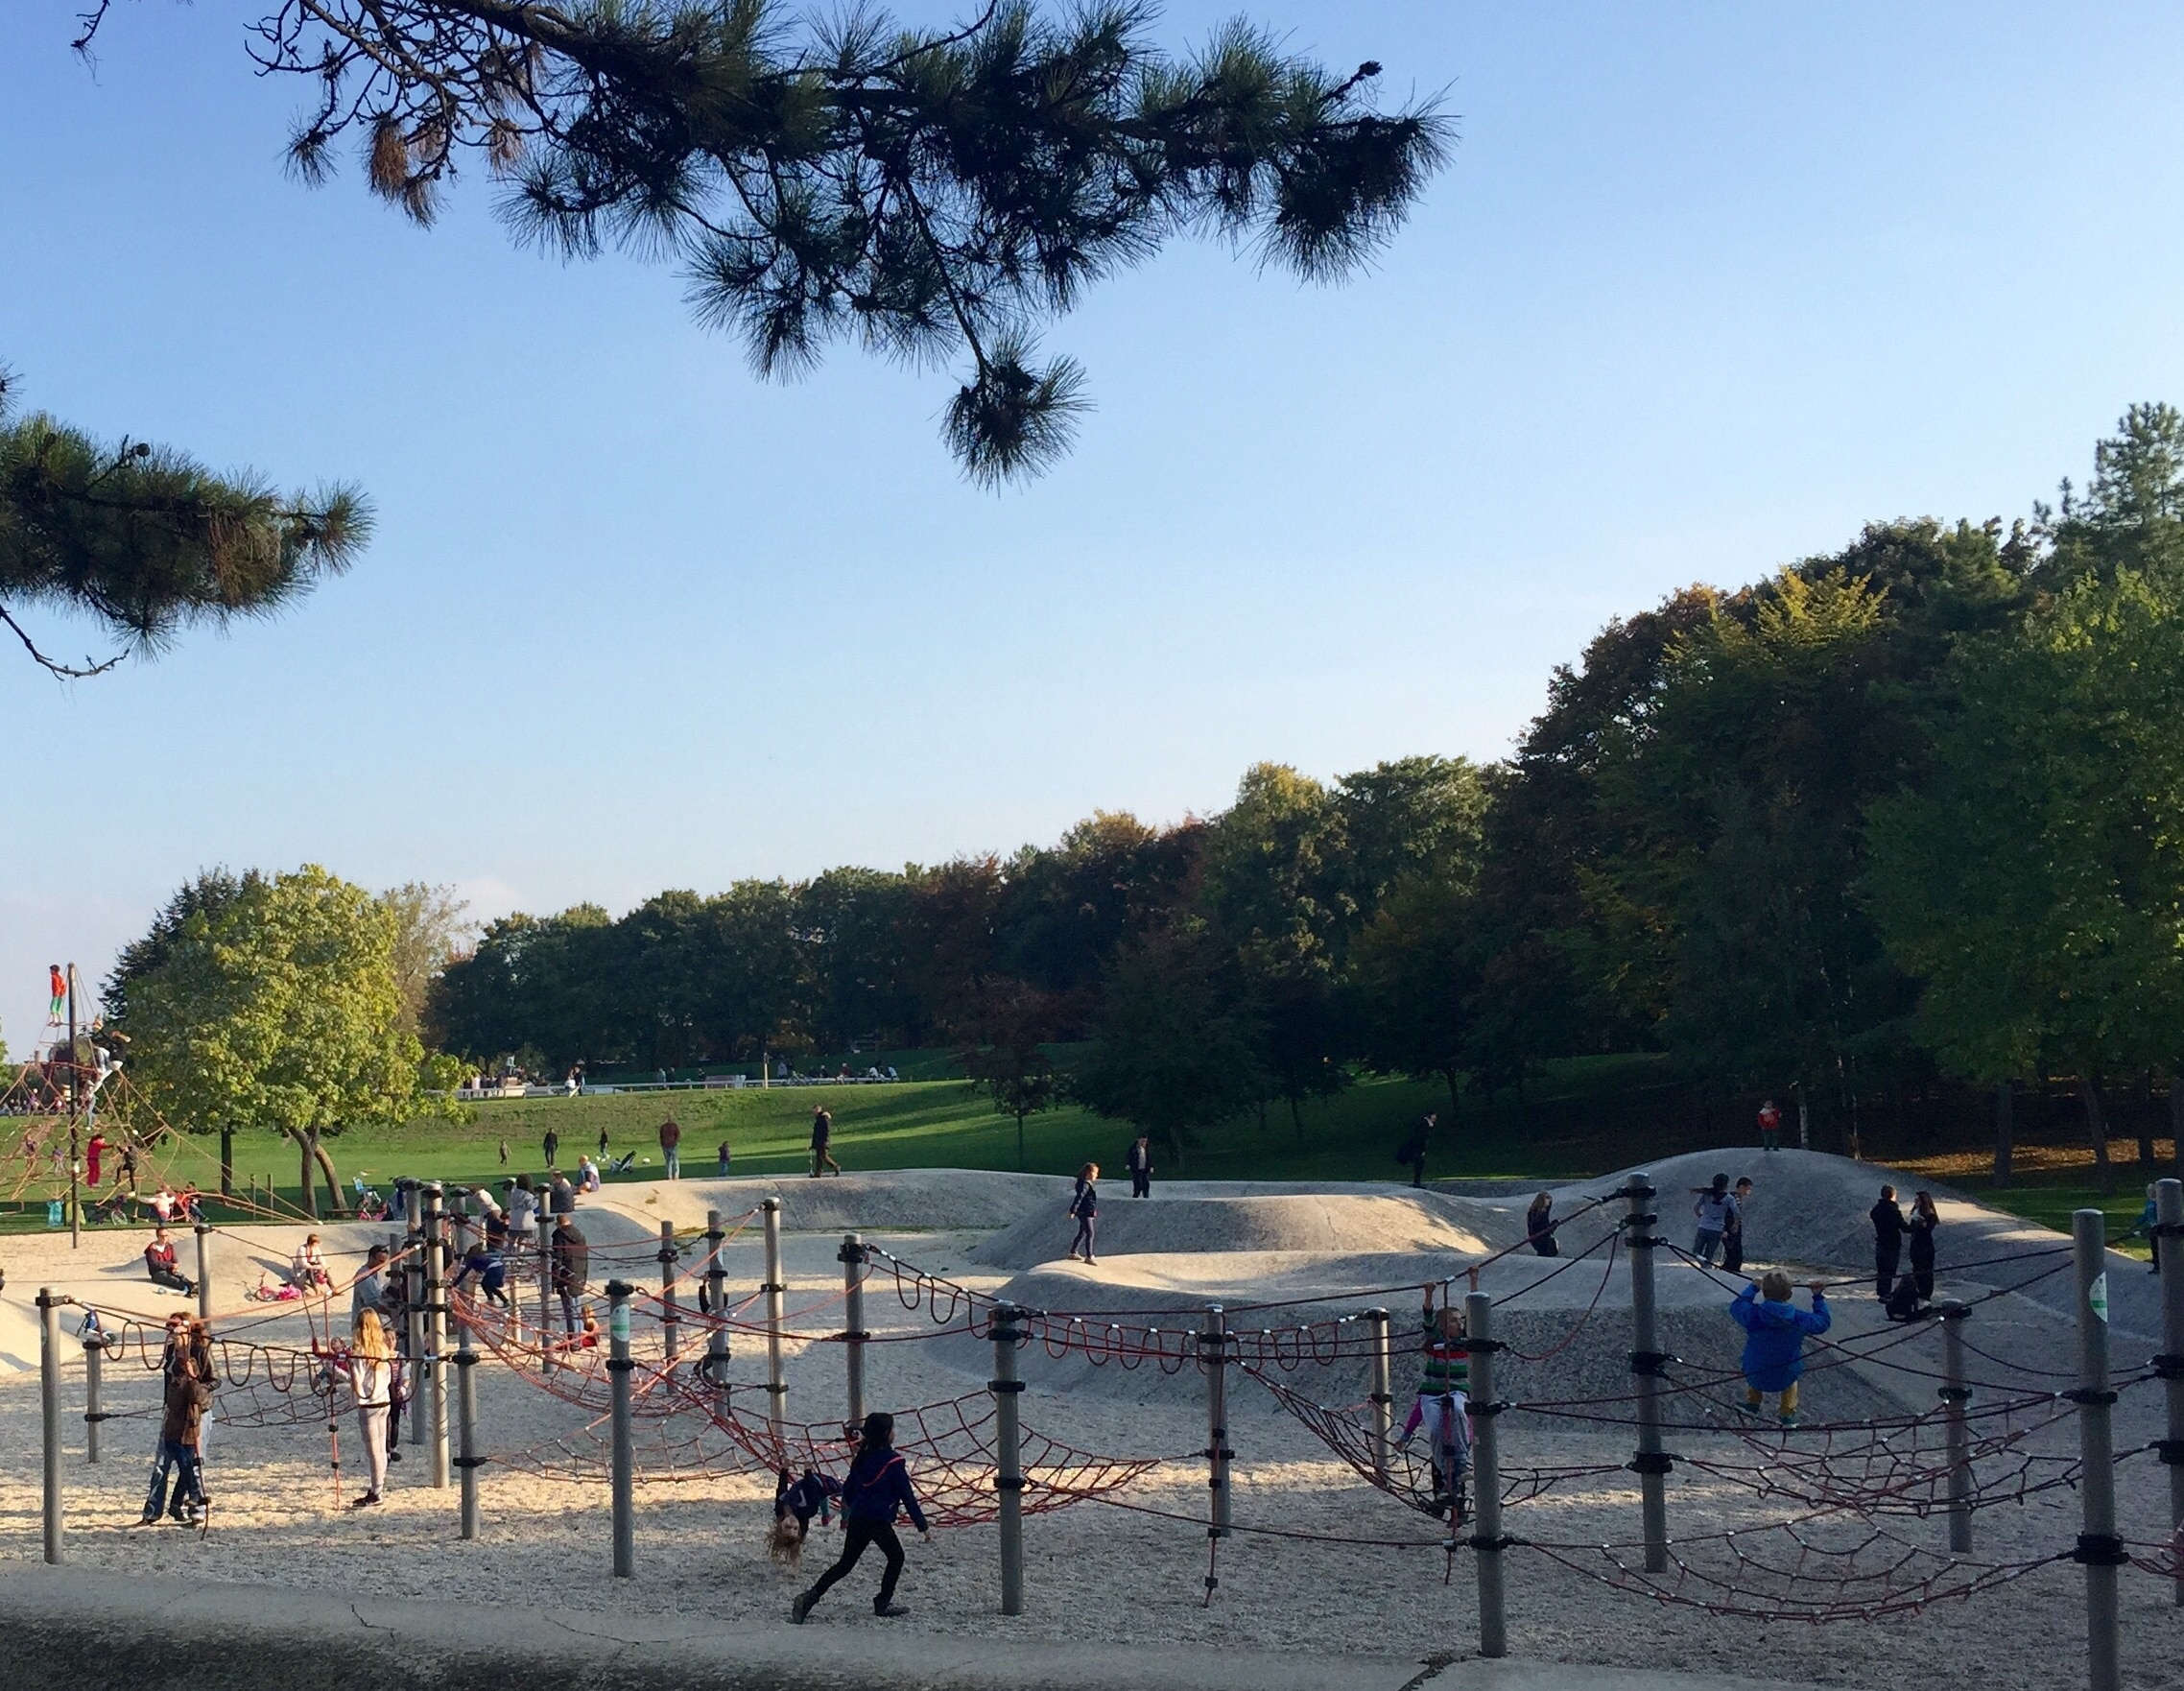 If your kids get bored of the Cathedral, head down to the Parc Leo Lagrange, it has really great playgrounds for kids of all ages.
#kidsfun 